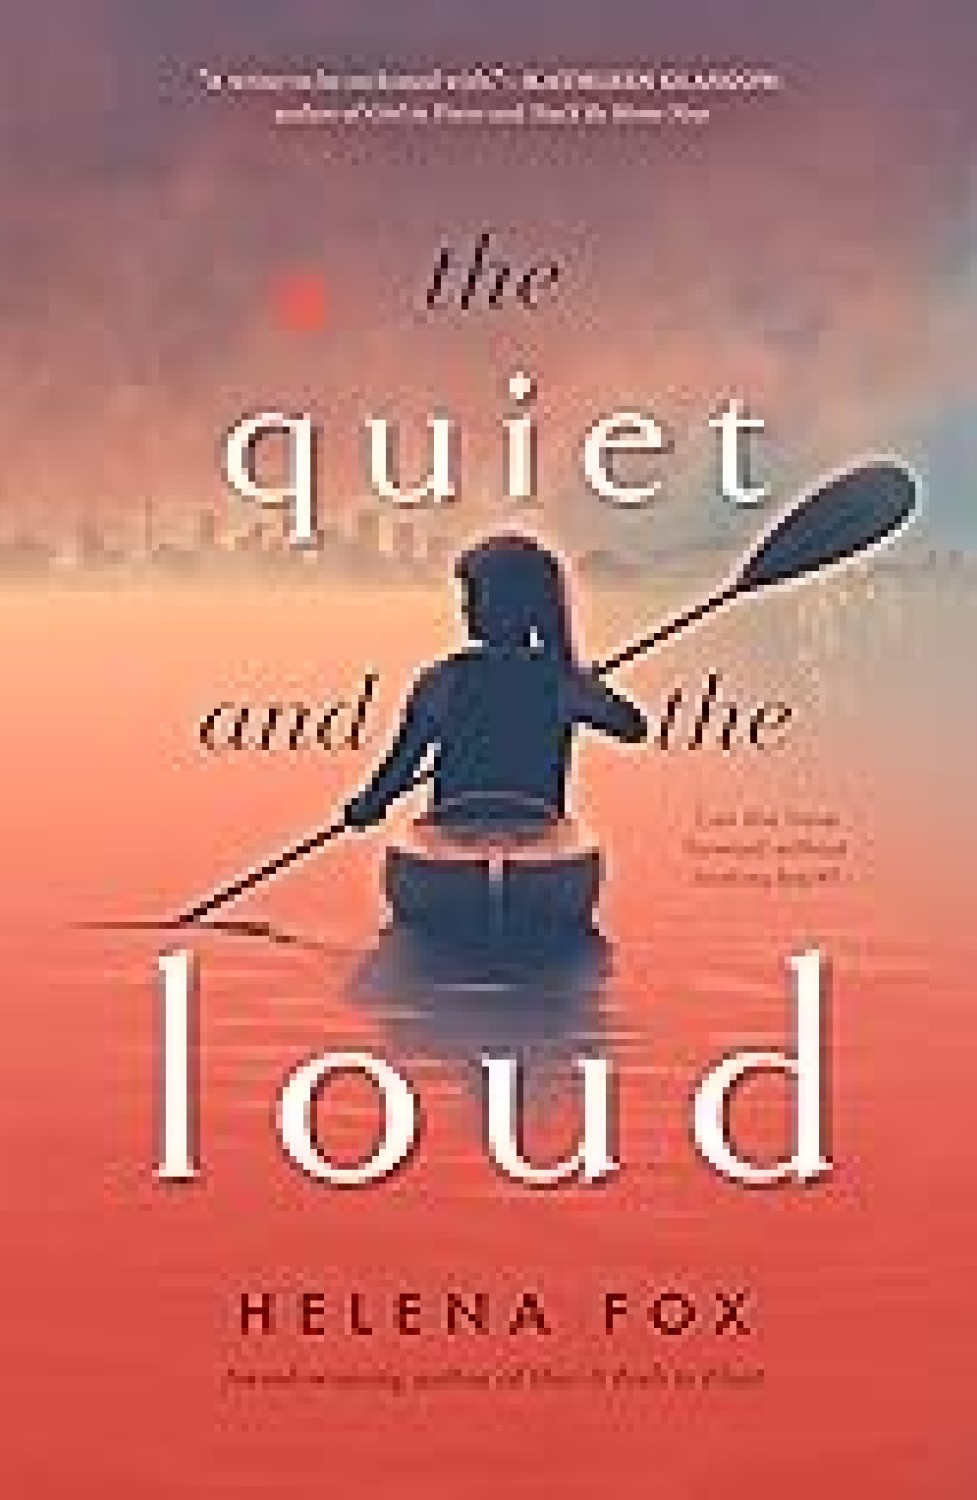 THE QUIET AND THE LOUD